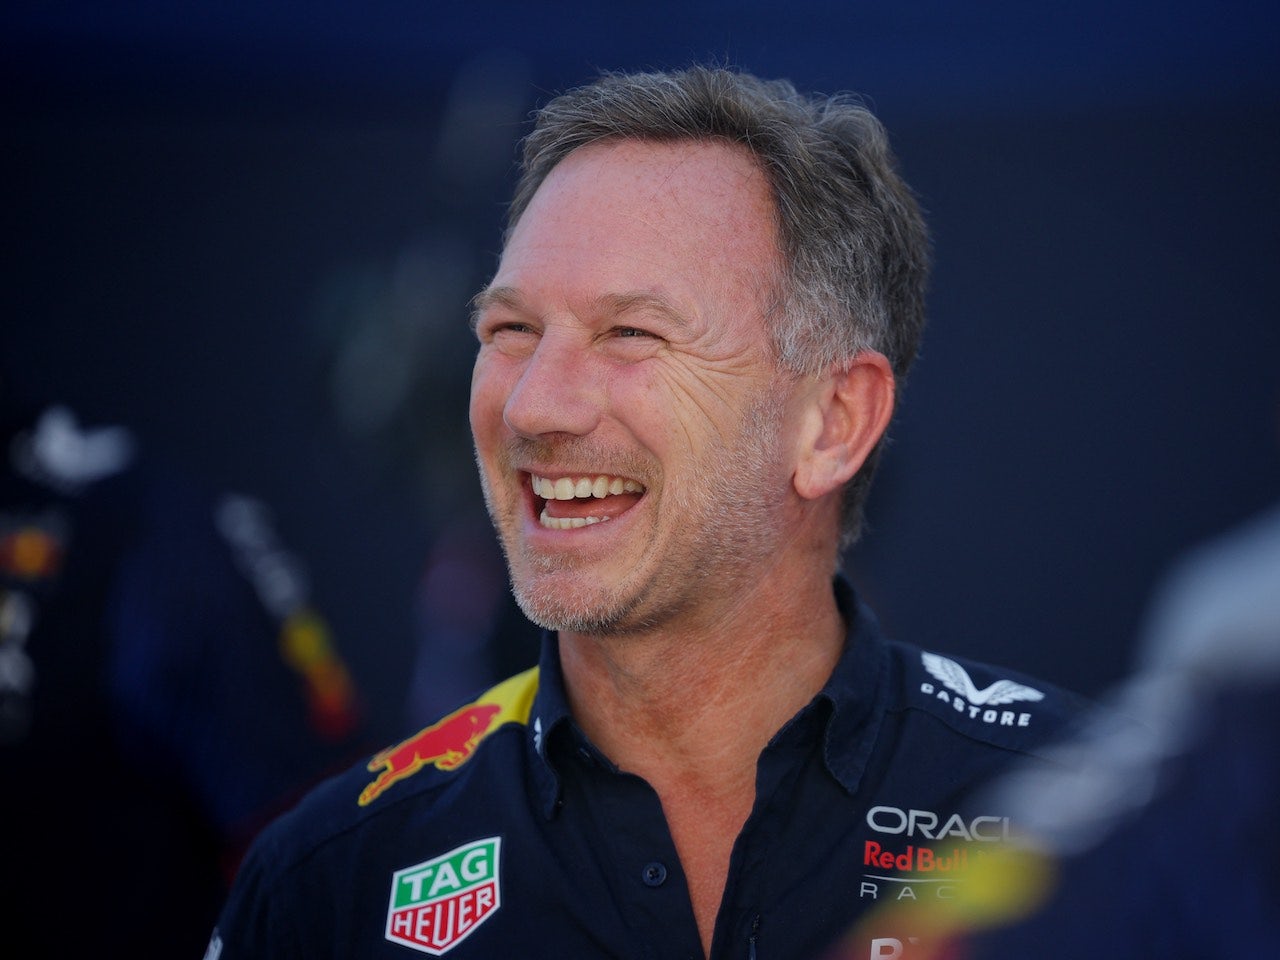 Horner could lose F1 career over accusations - Albers